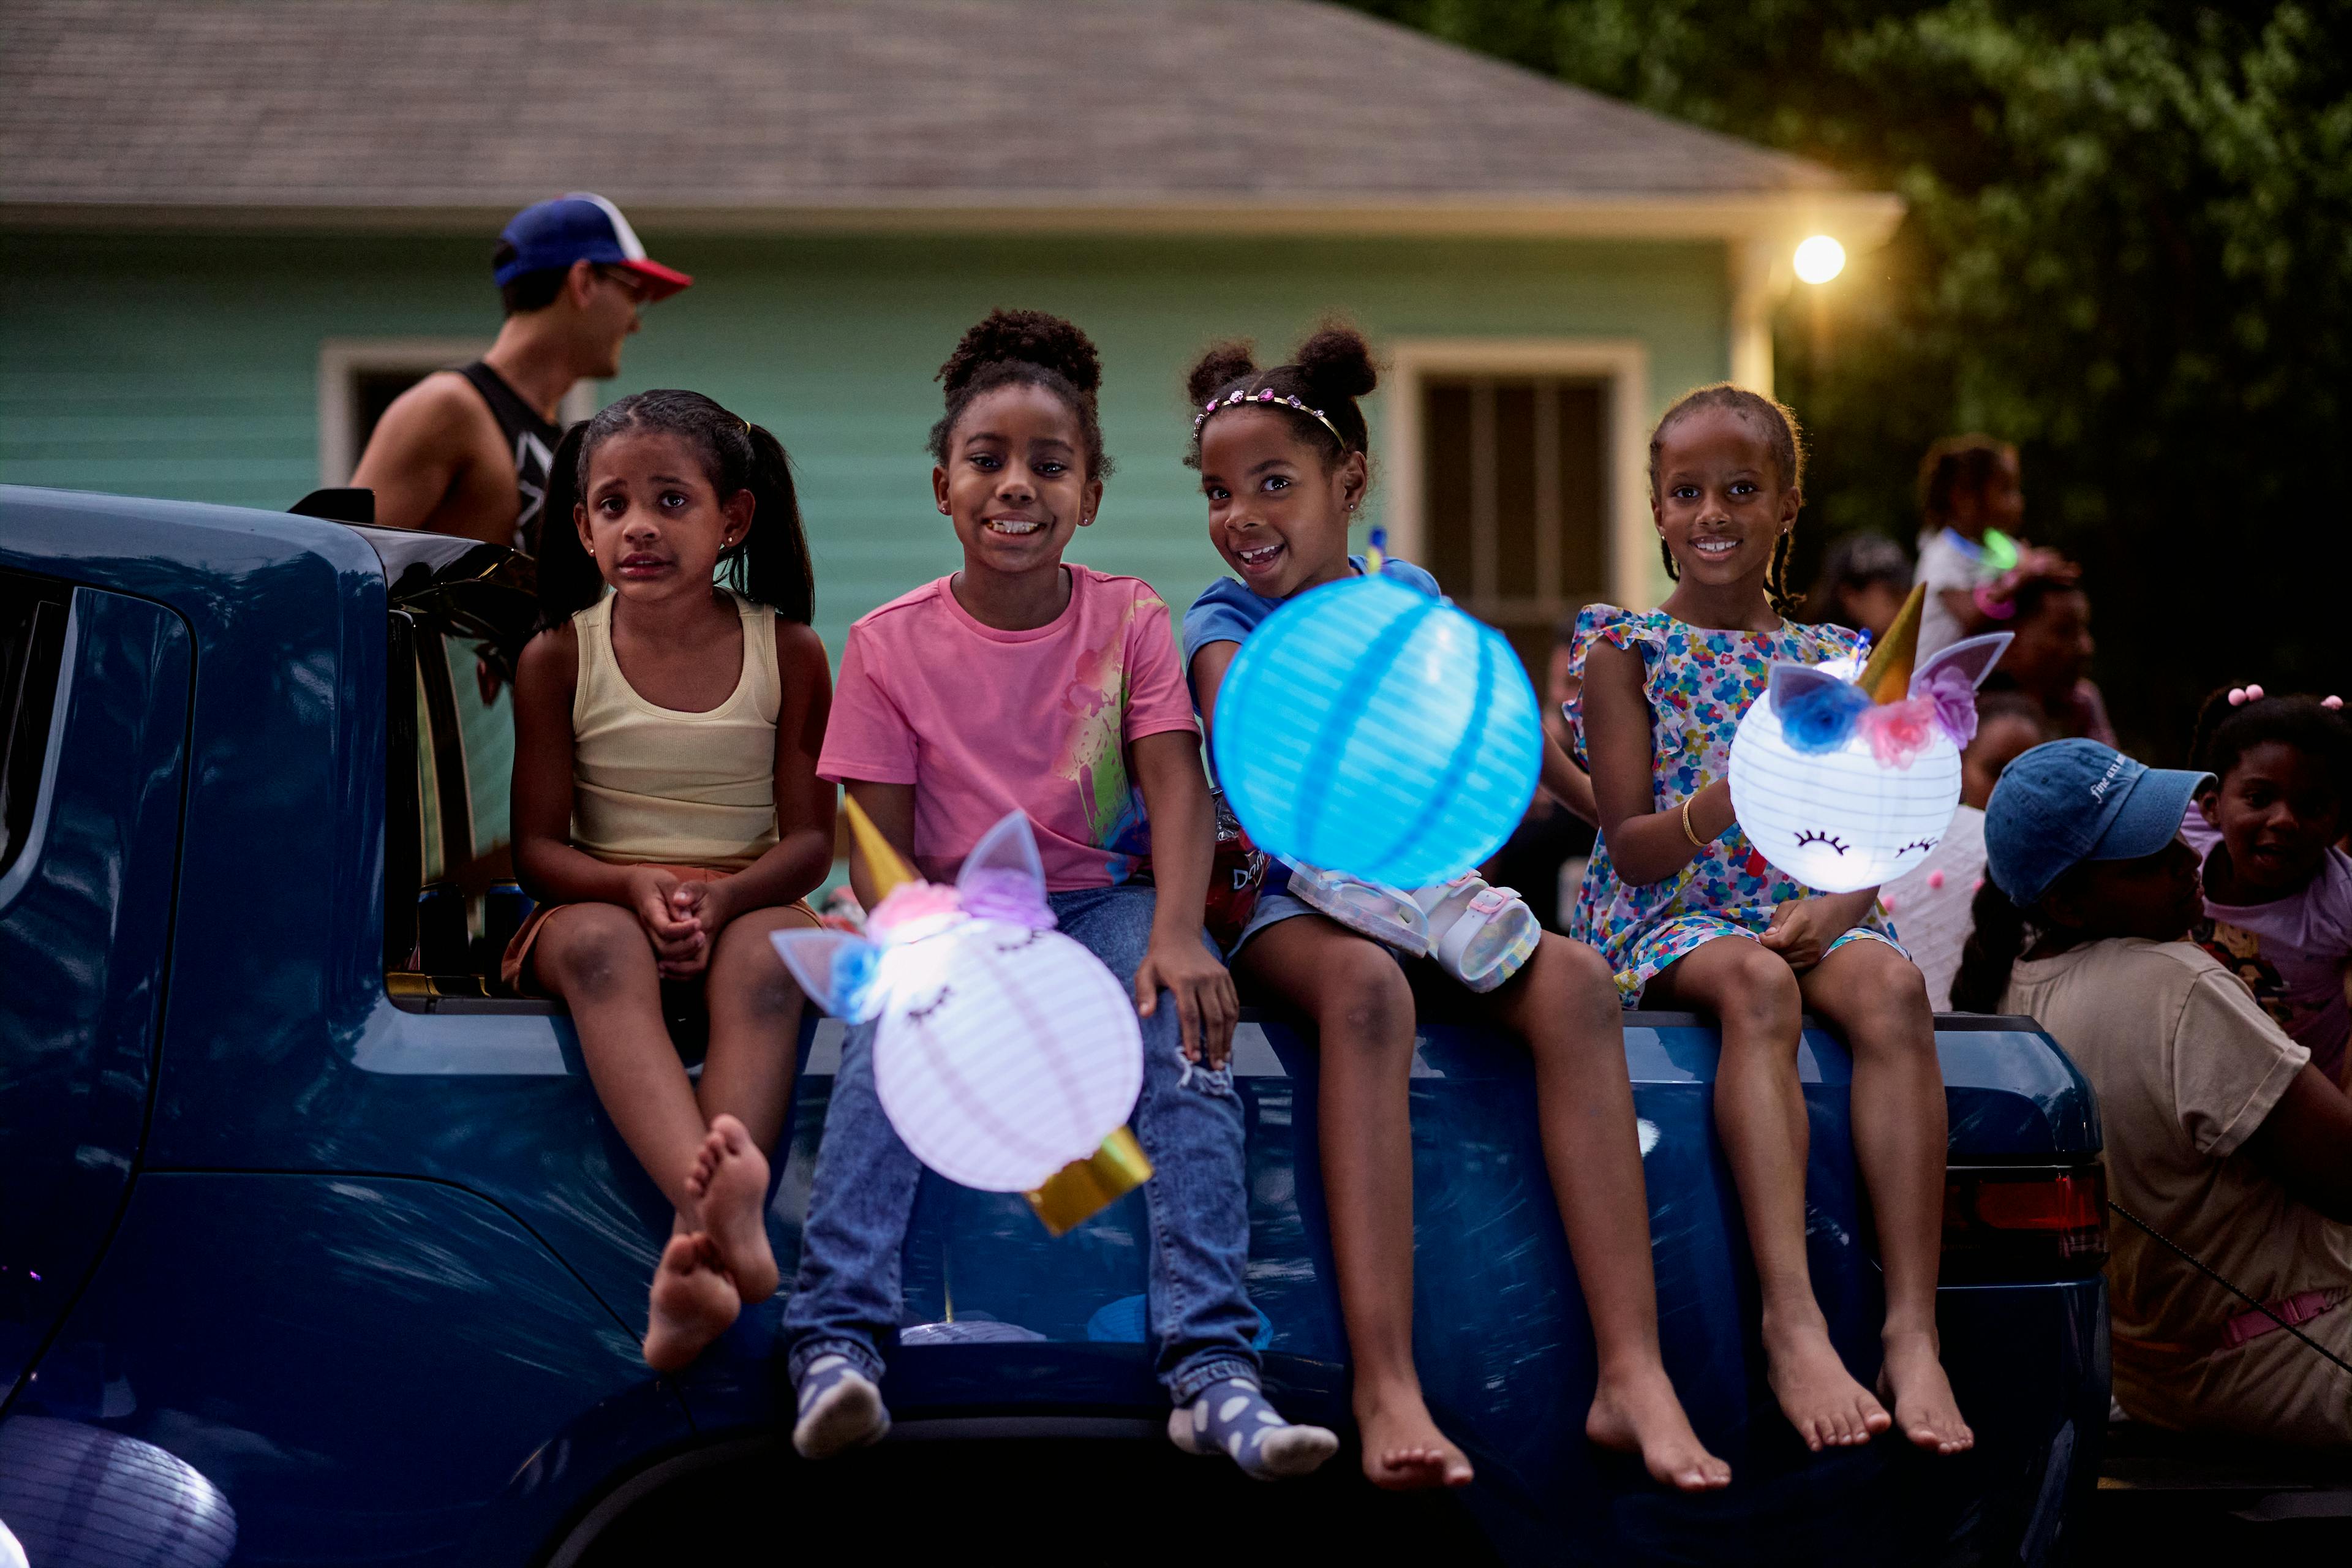 A group of young girls sit on the back of a truck holding homemade lanterns and smiling.